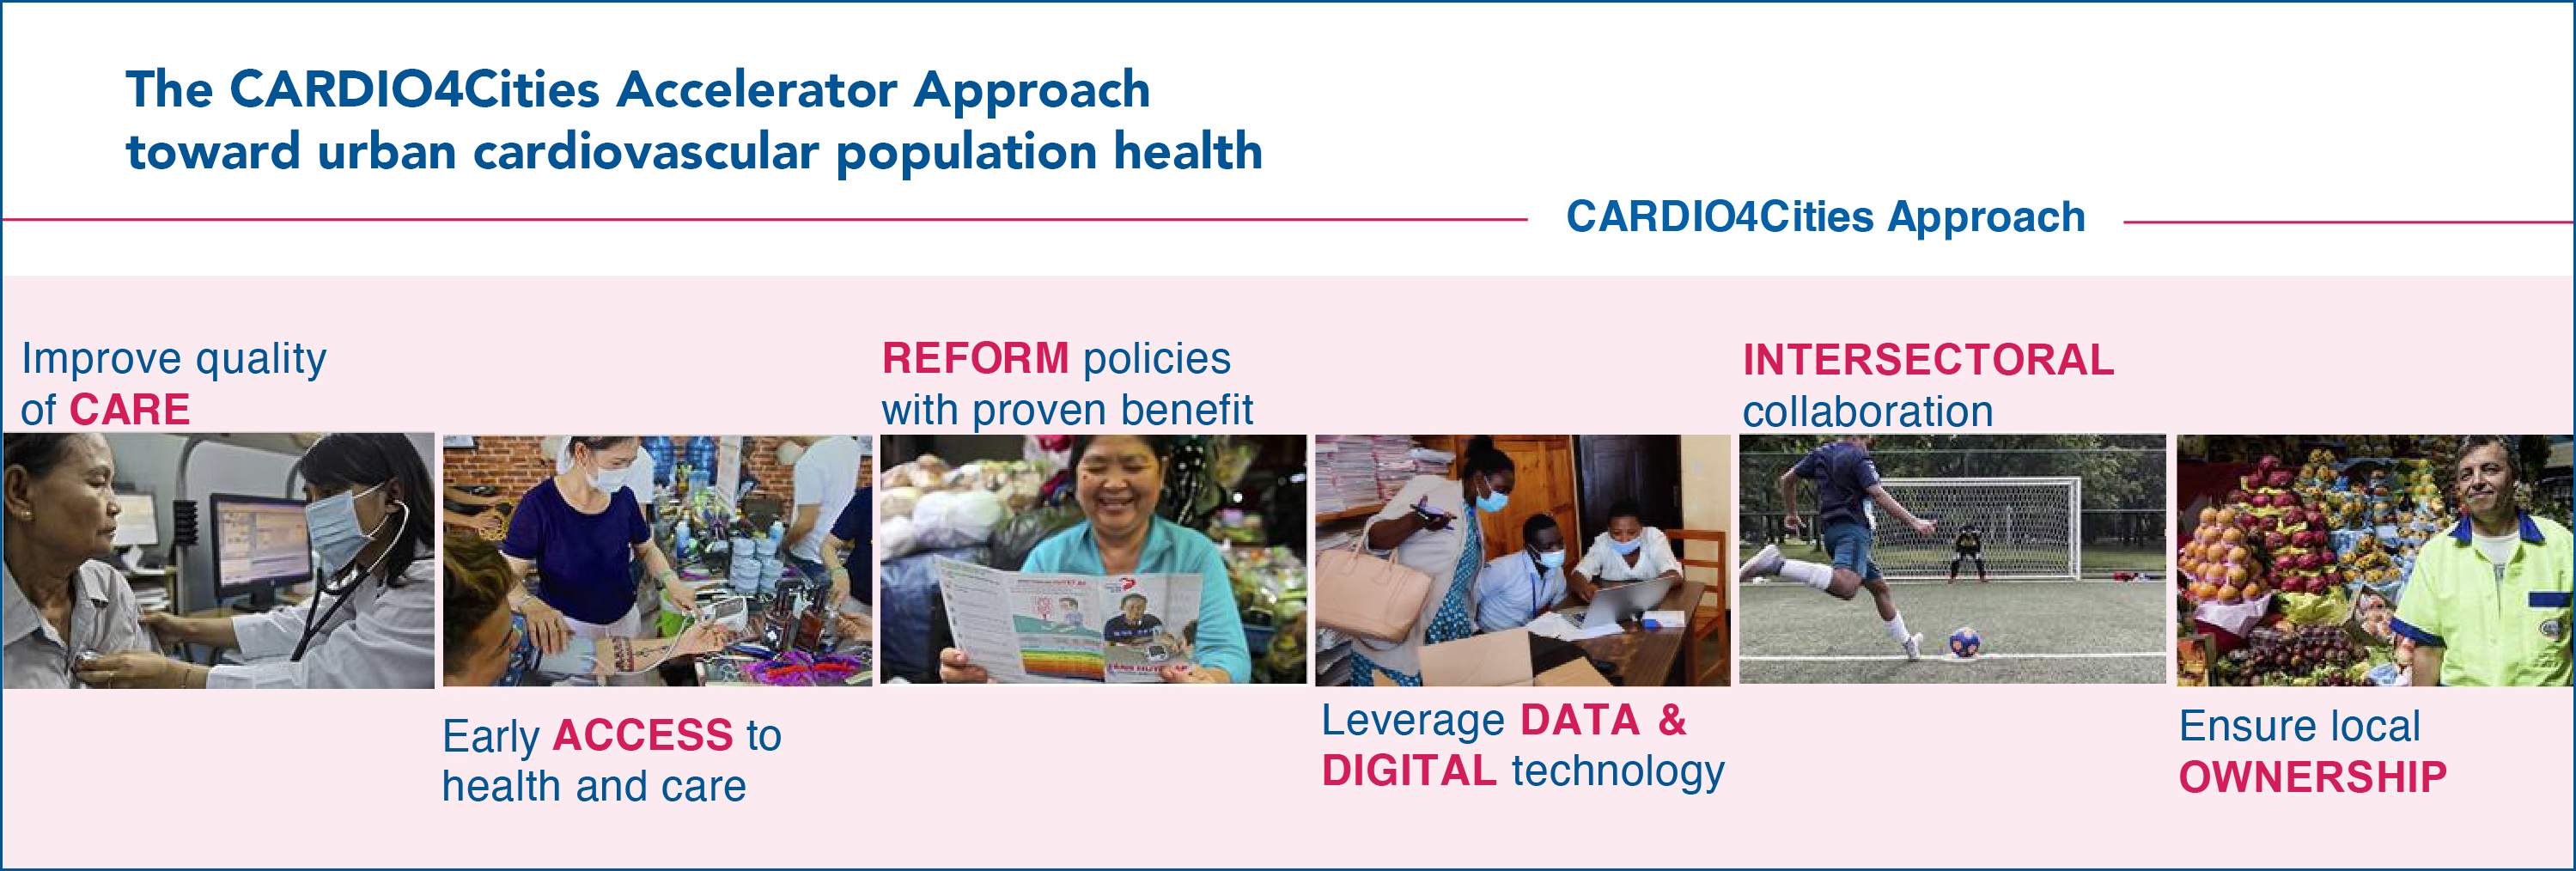 The Cardio4Cities Accelerator Approach: Care, Access, Reform, Data & Digital, Intersectoral, Ownership